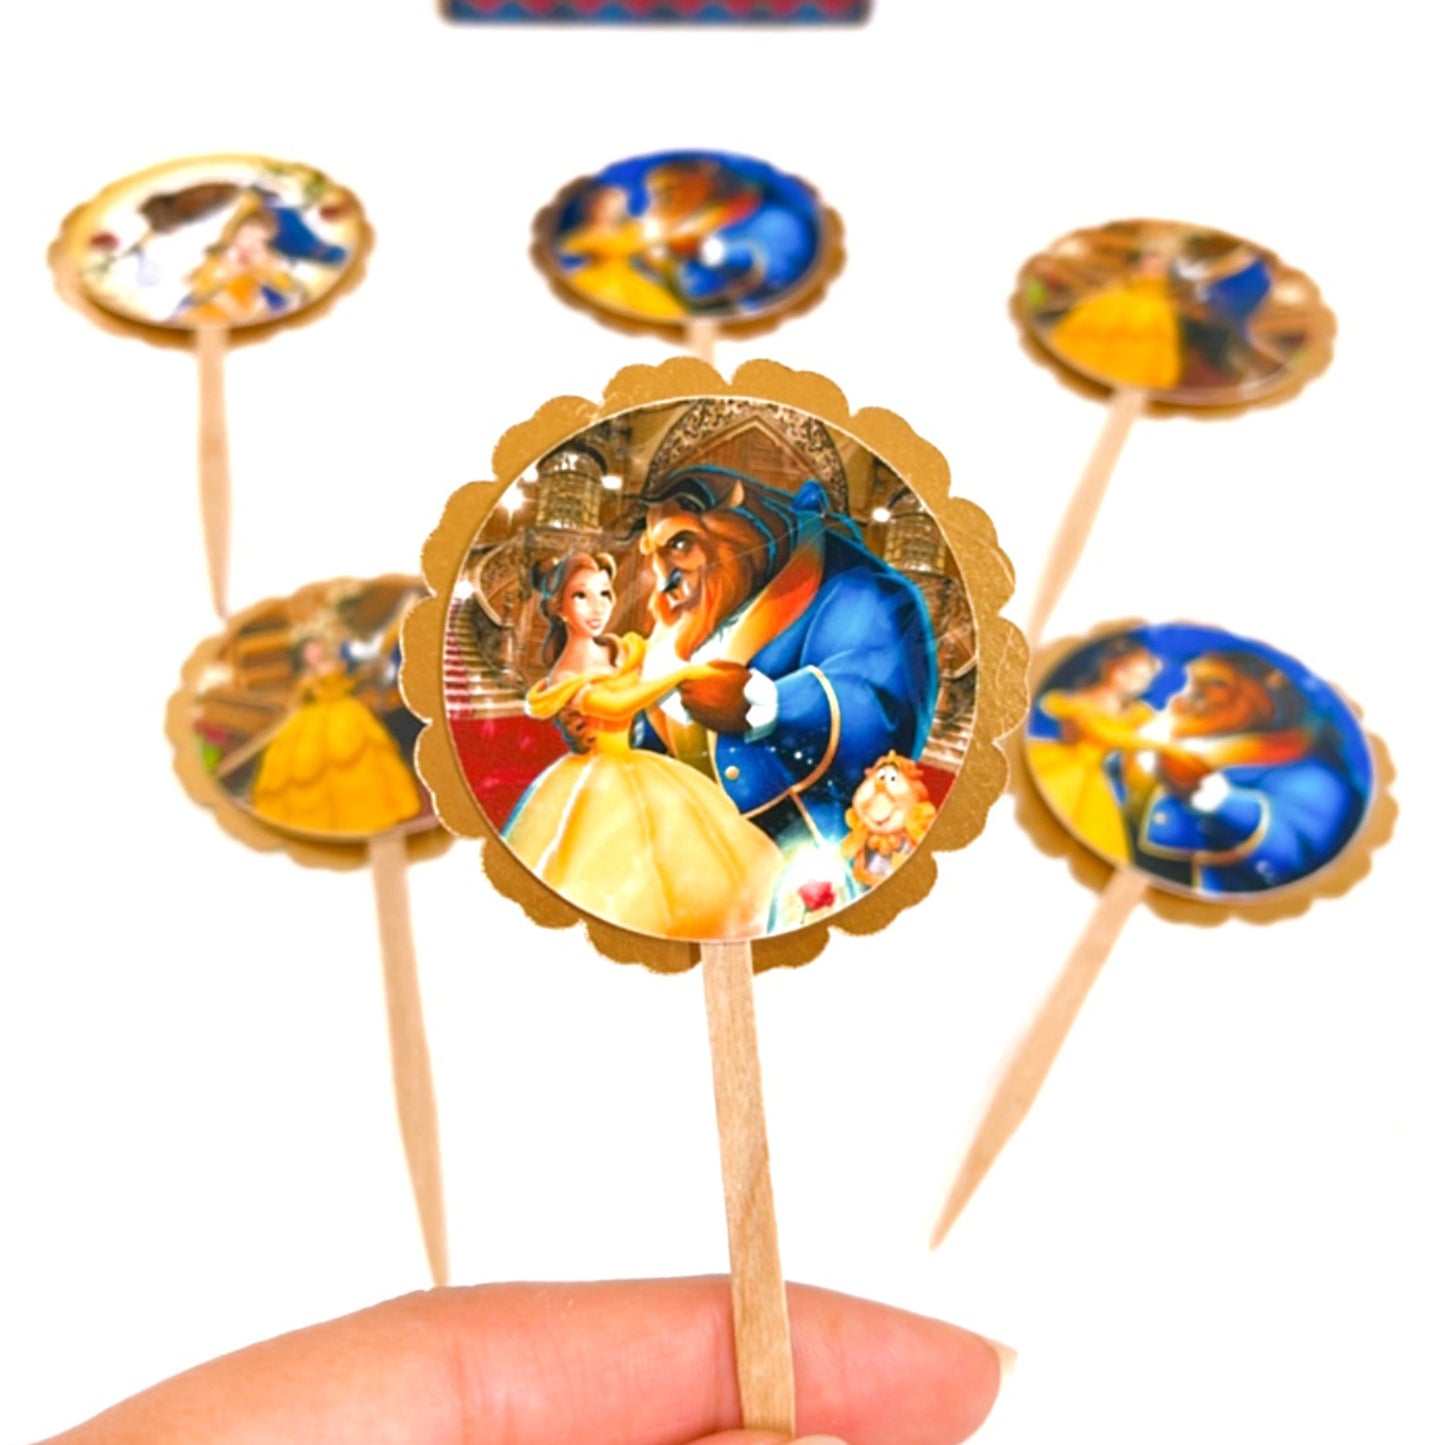 Beauty and the beast Cupcake topper